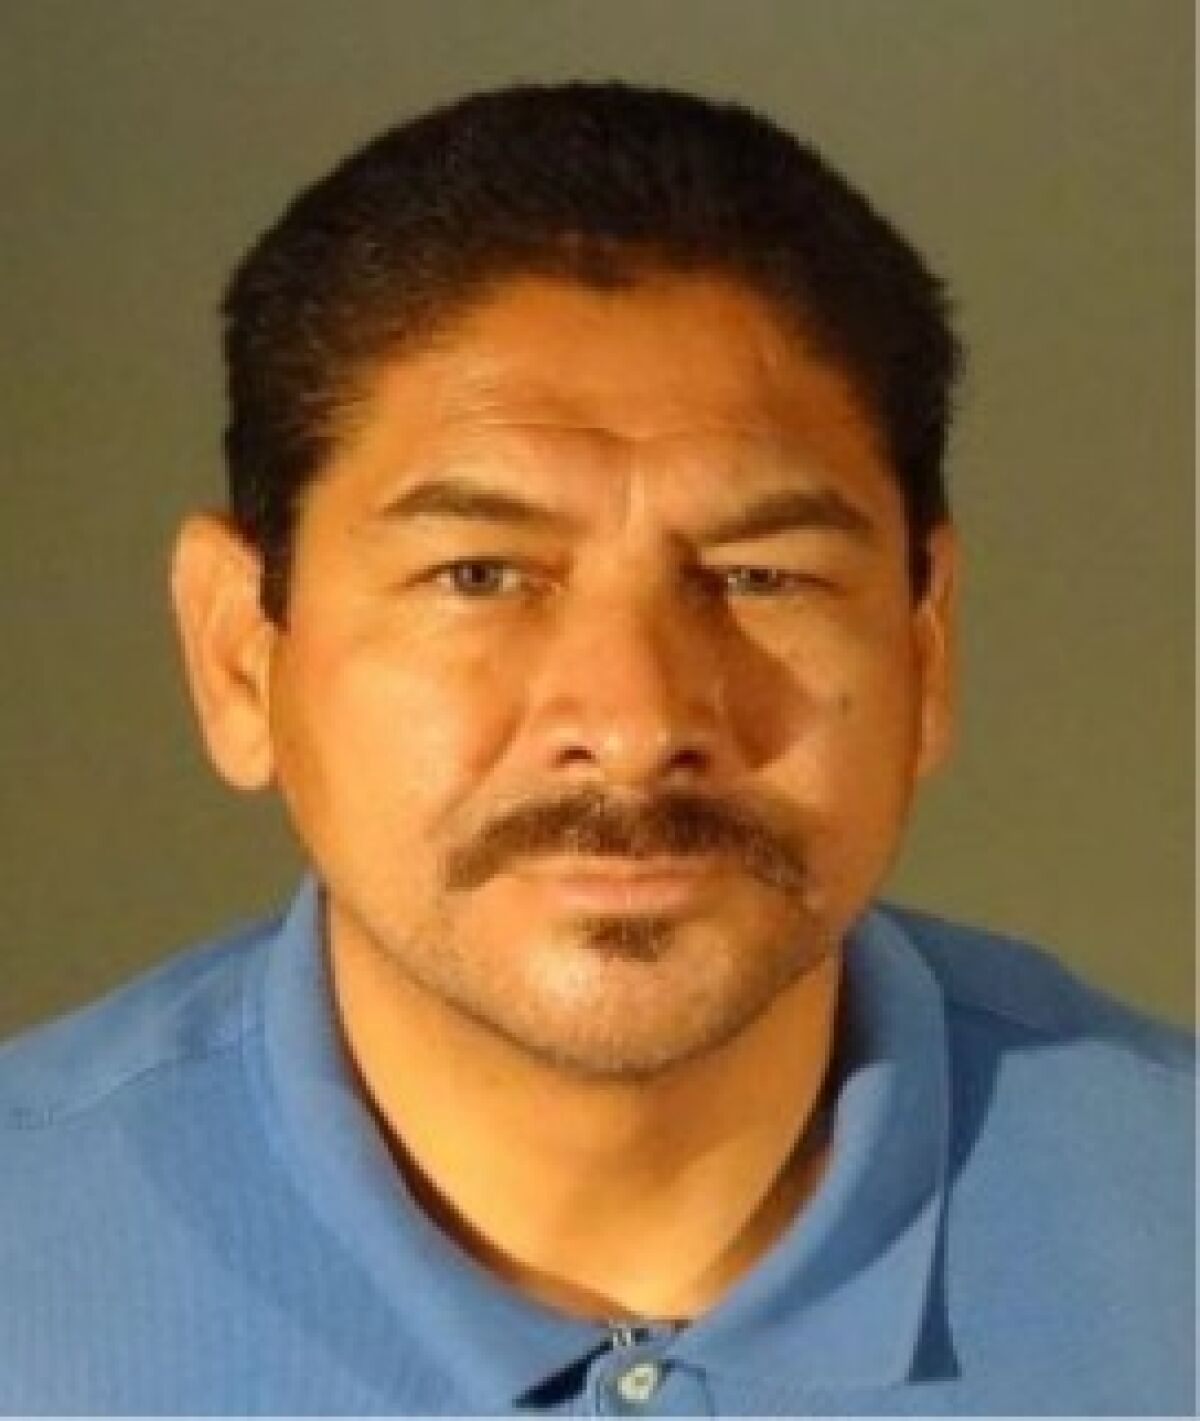 The Los Angeles Police Department is searching for Herbert Nixon Flores